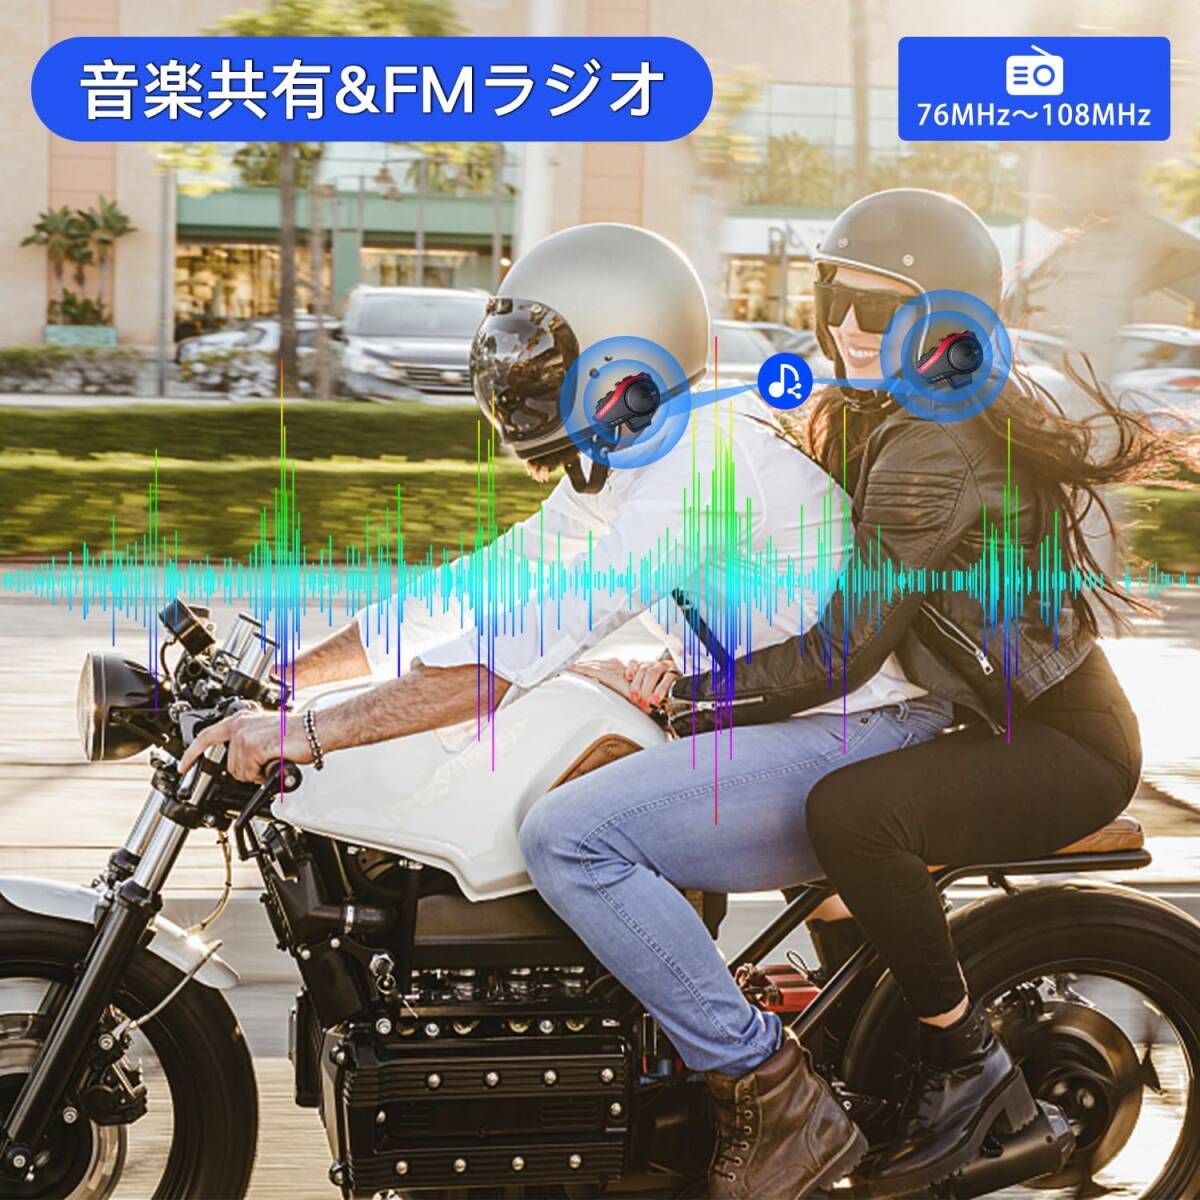  bike in cam maximum 10 person same time telephone call maximum telephone call distance 2000m Bluetooth 5.0 transceiver bike .... continuation 28H hour telephone call IP67 waterproof (1 sheets, Gold )